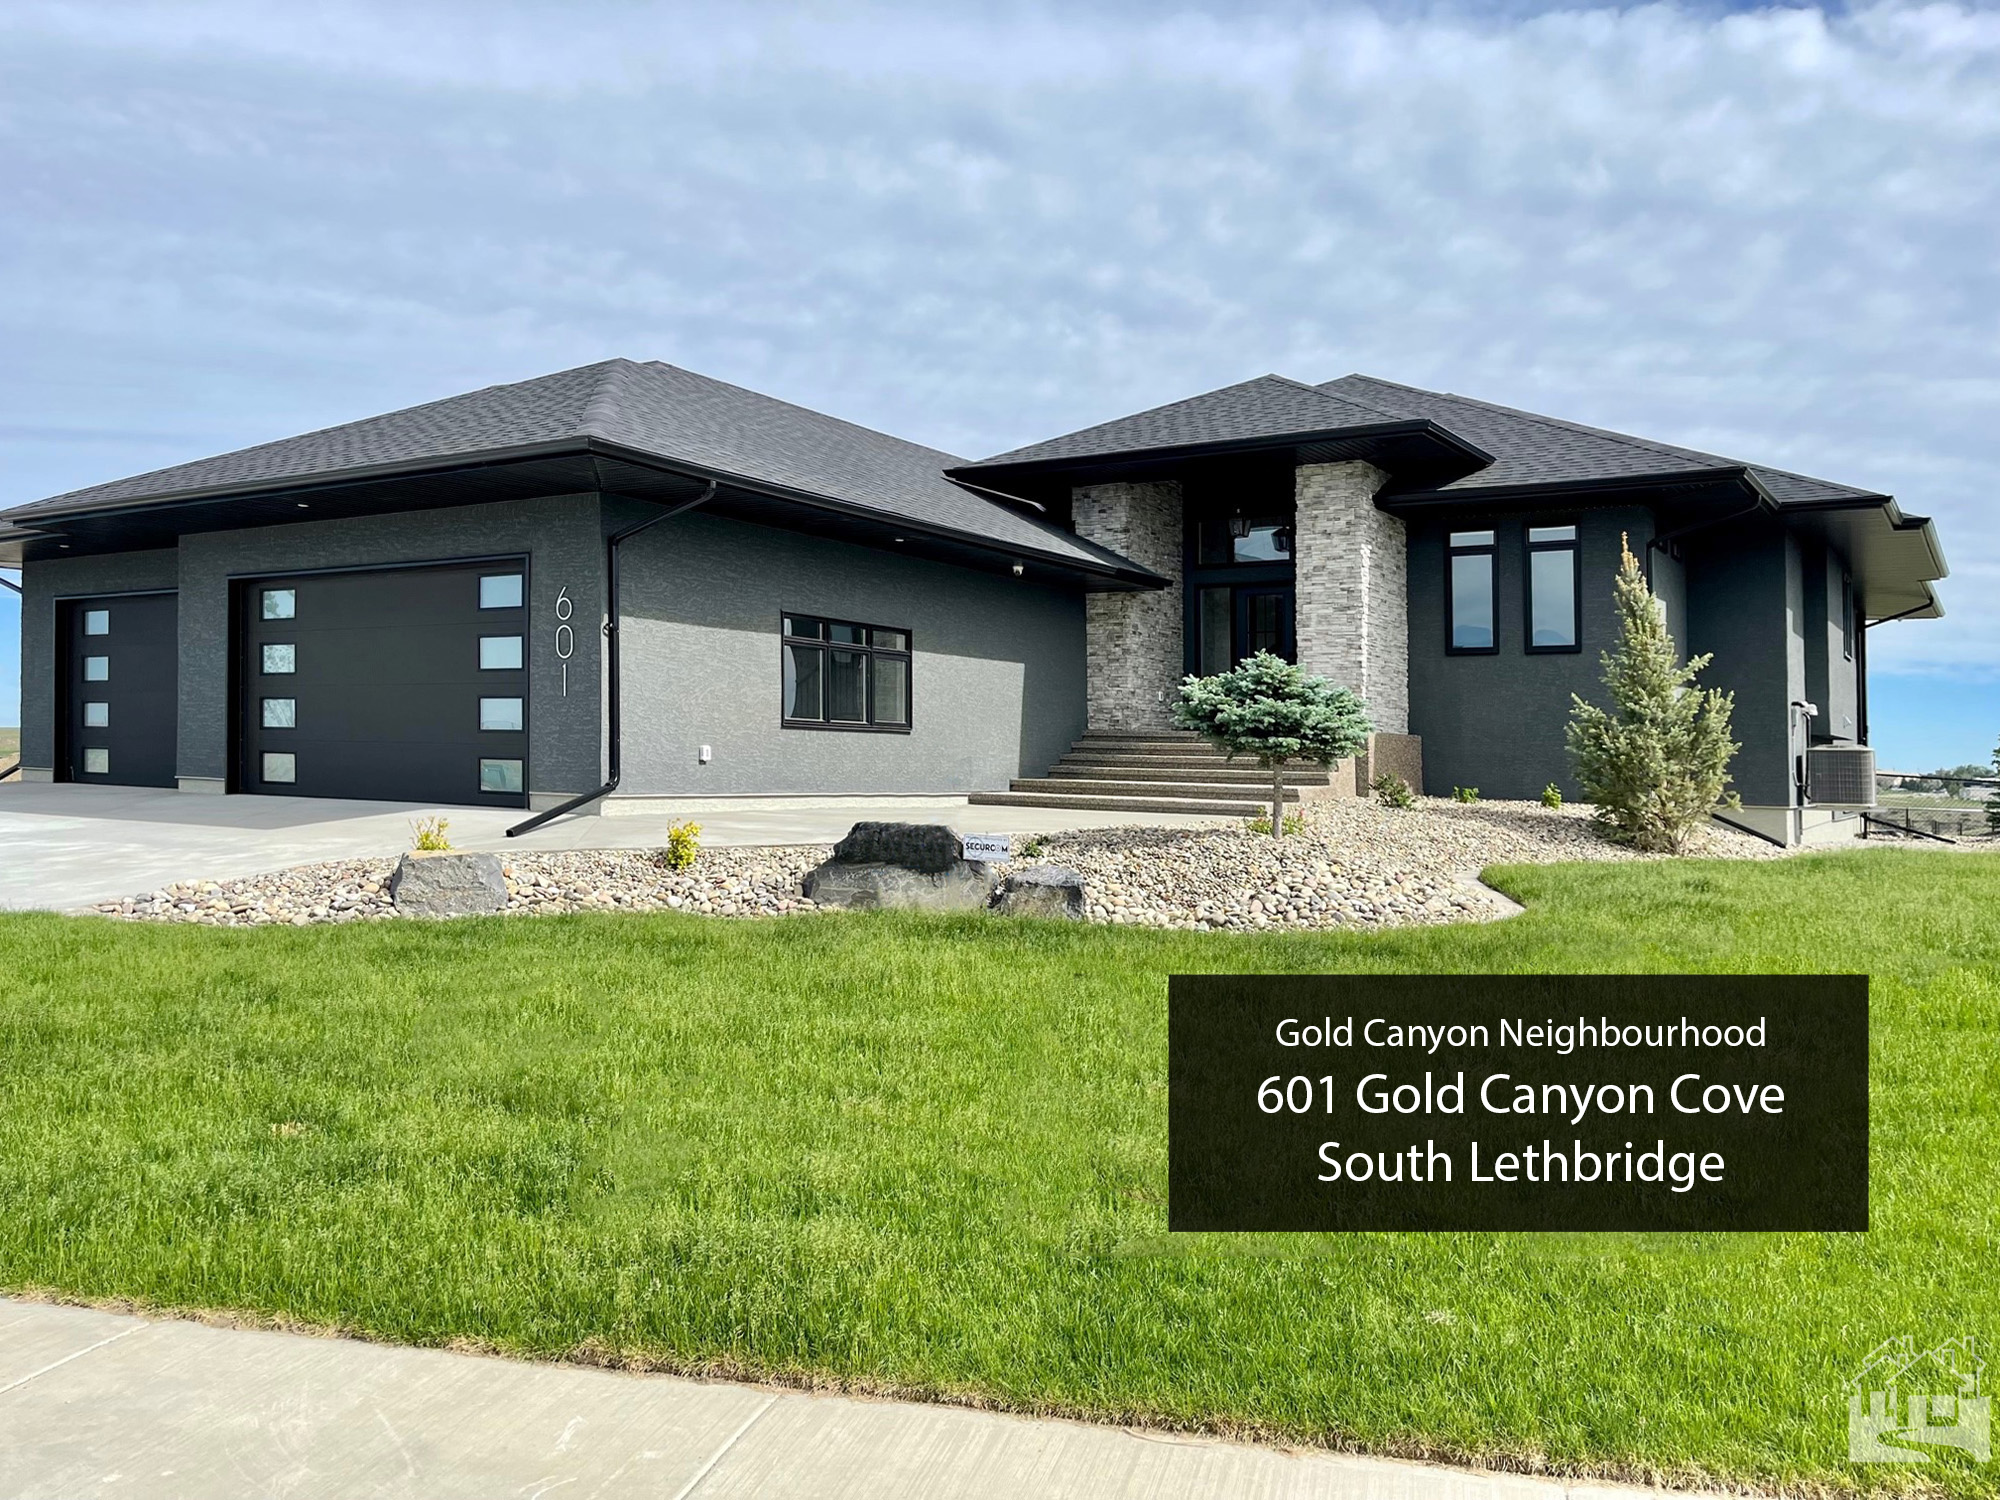 601 Gold Canyon Cove South Lethbridge Cover image